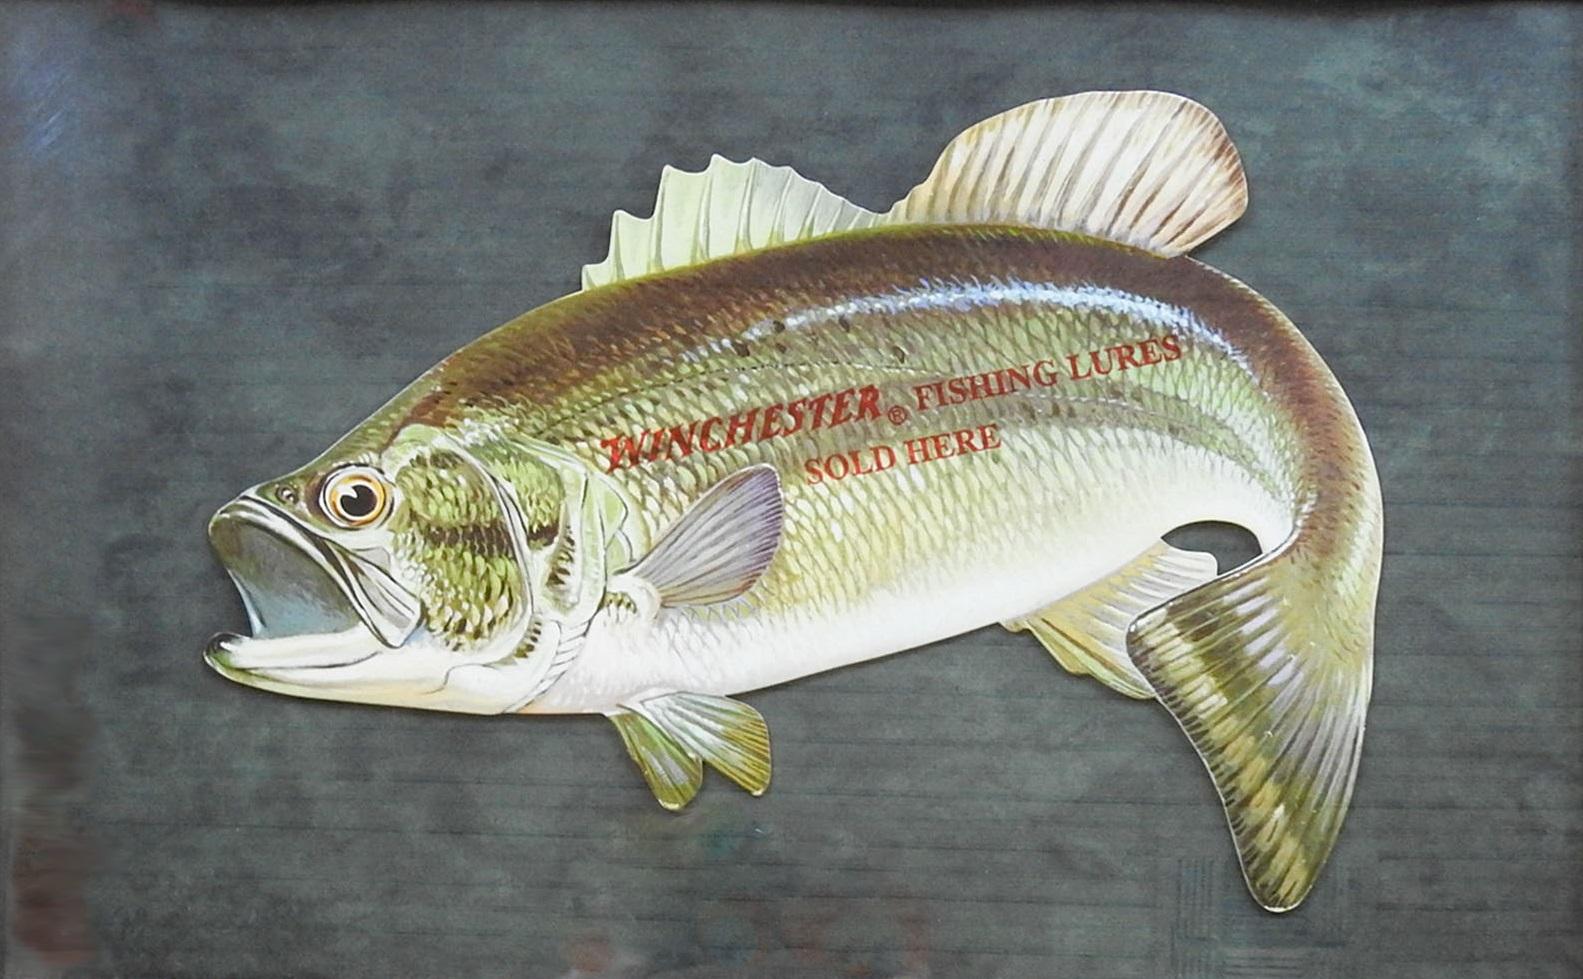 Vintage die cut cardboard advertising sign. Large mouth bass with Winchester Fishing Lures sold here. Mounted on mottled green paper. Displayed under glass in vintage oak frame, fish is 18